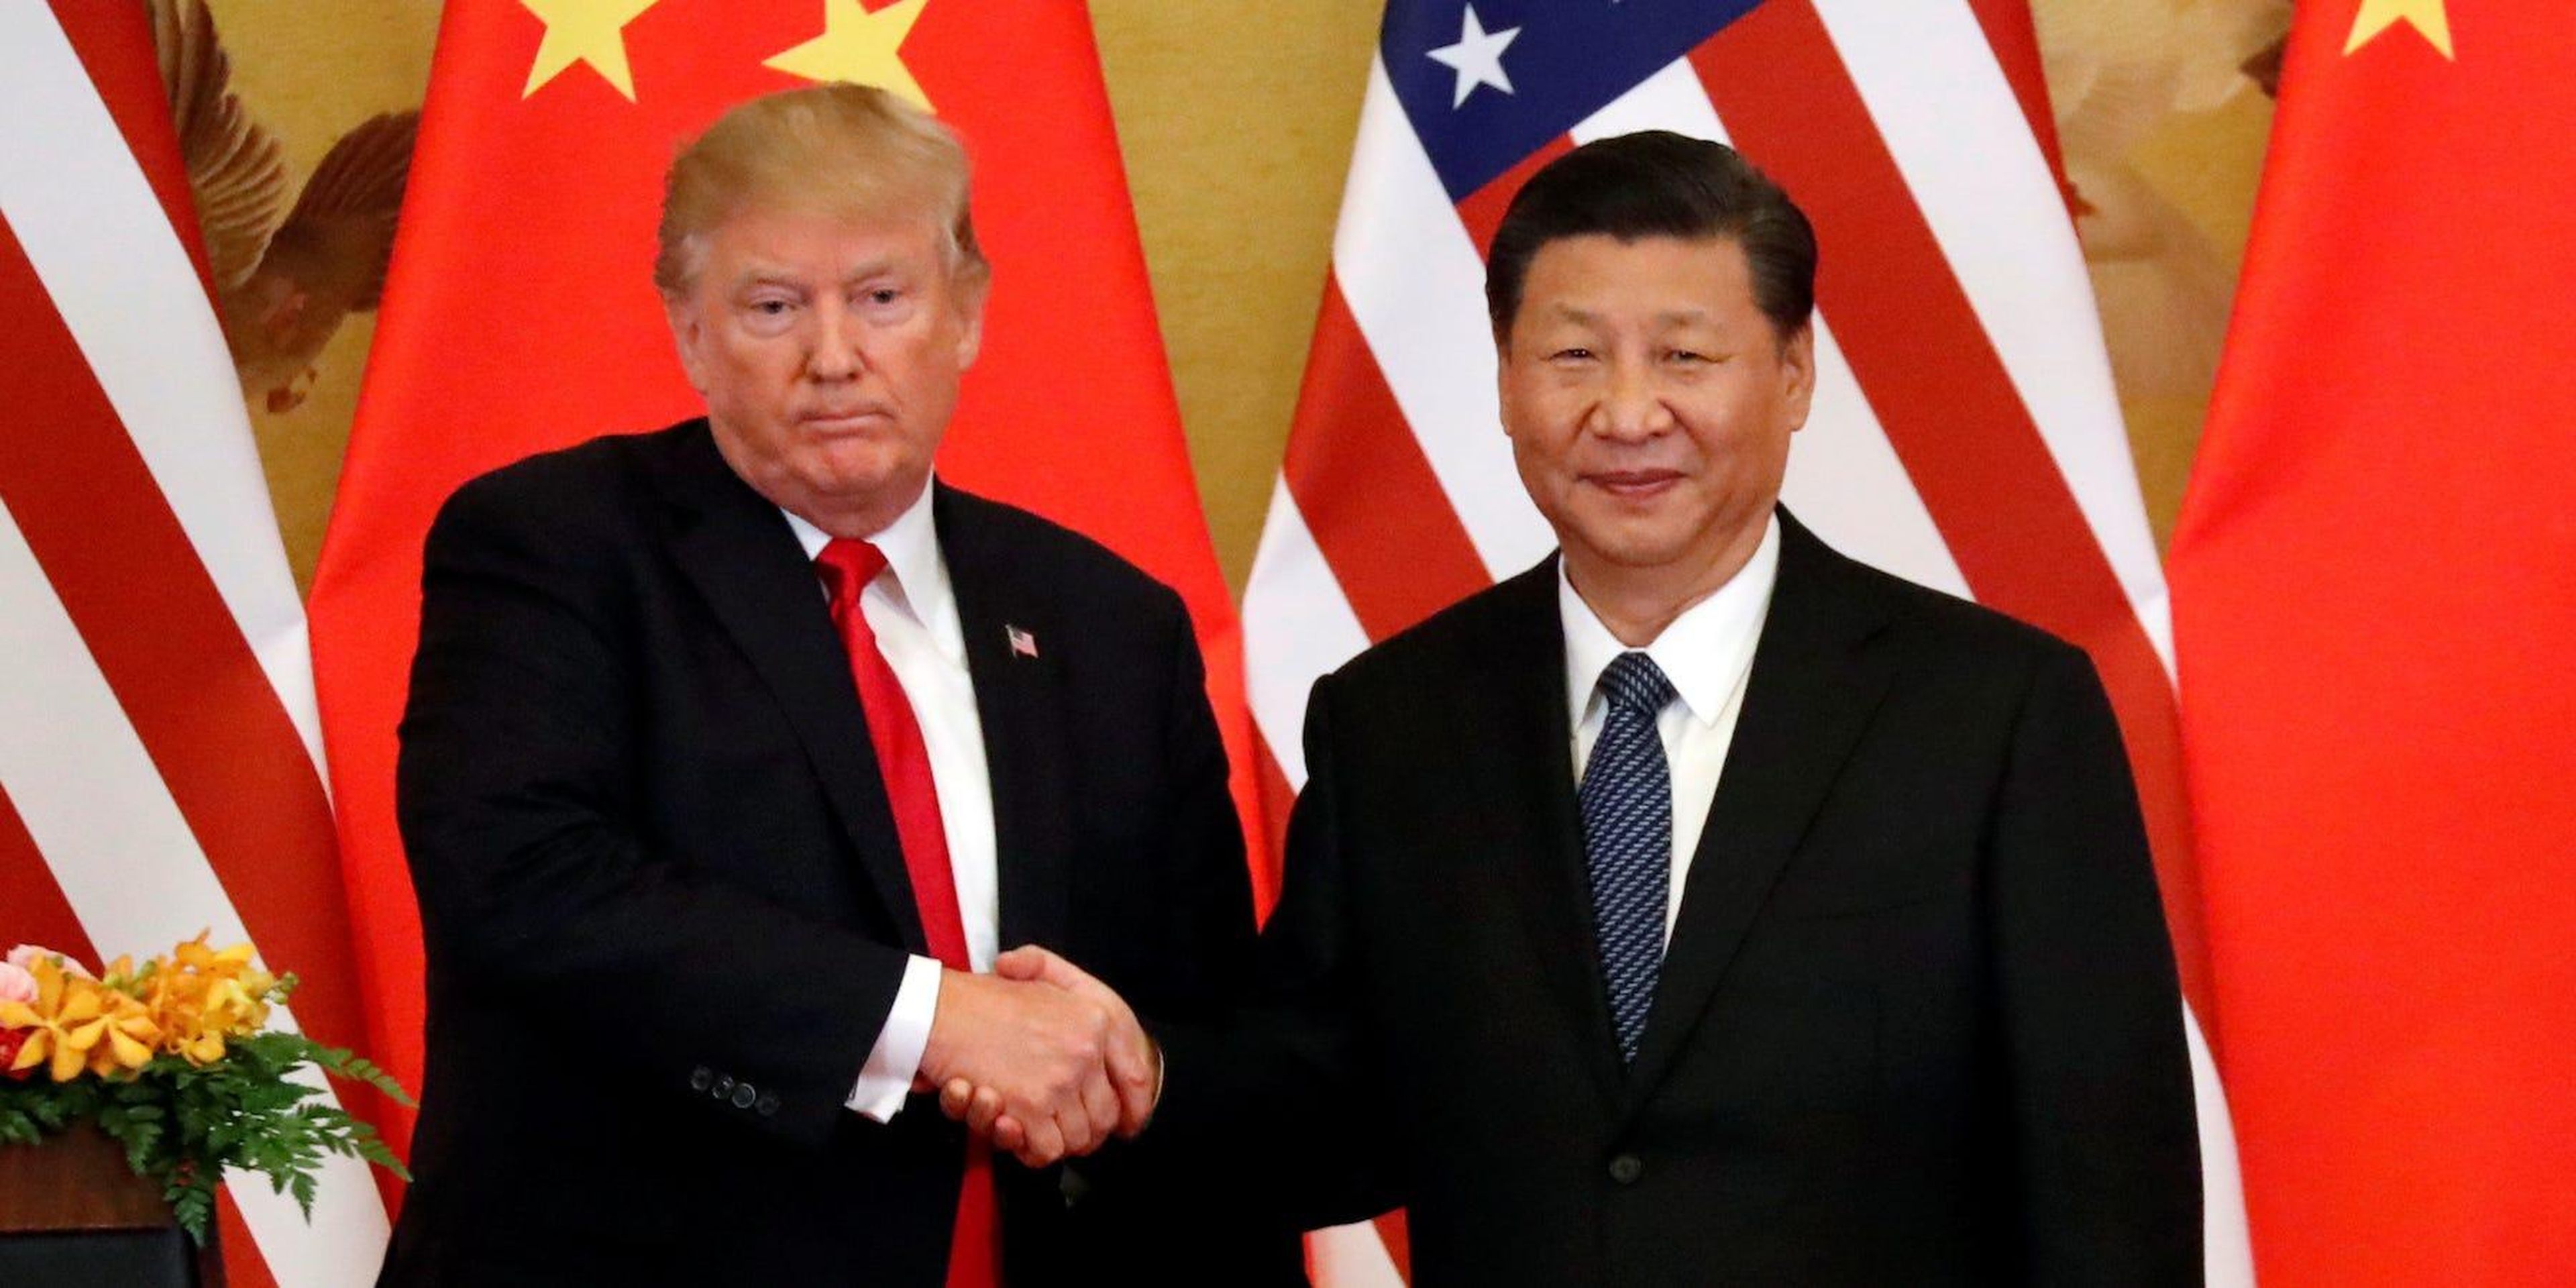 President Donald Trump and China's President Xi Jinping meet in Beijing in November.